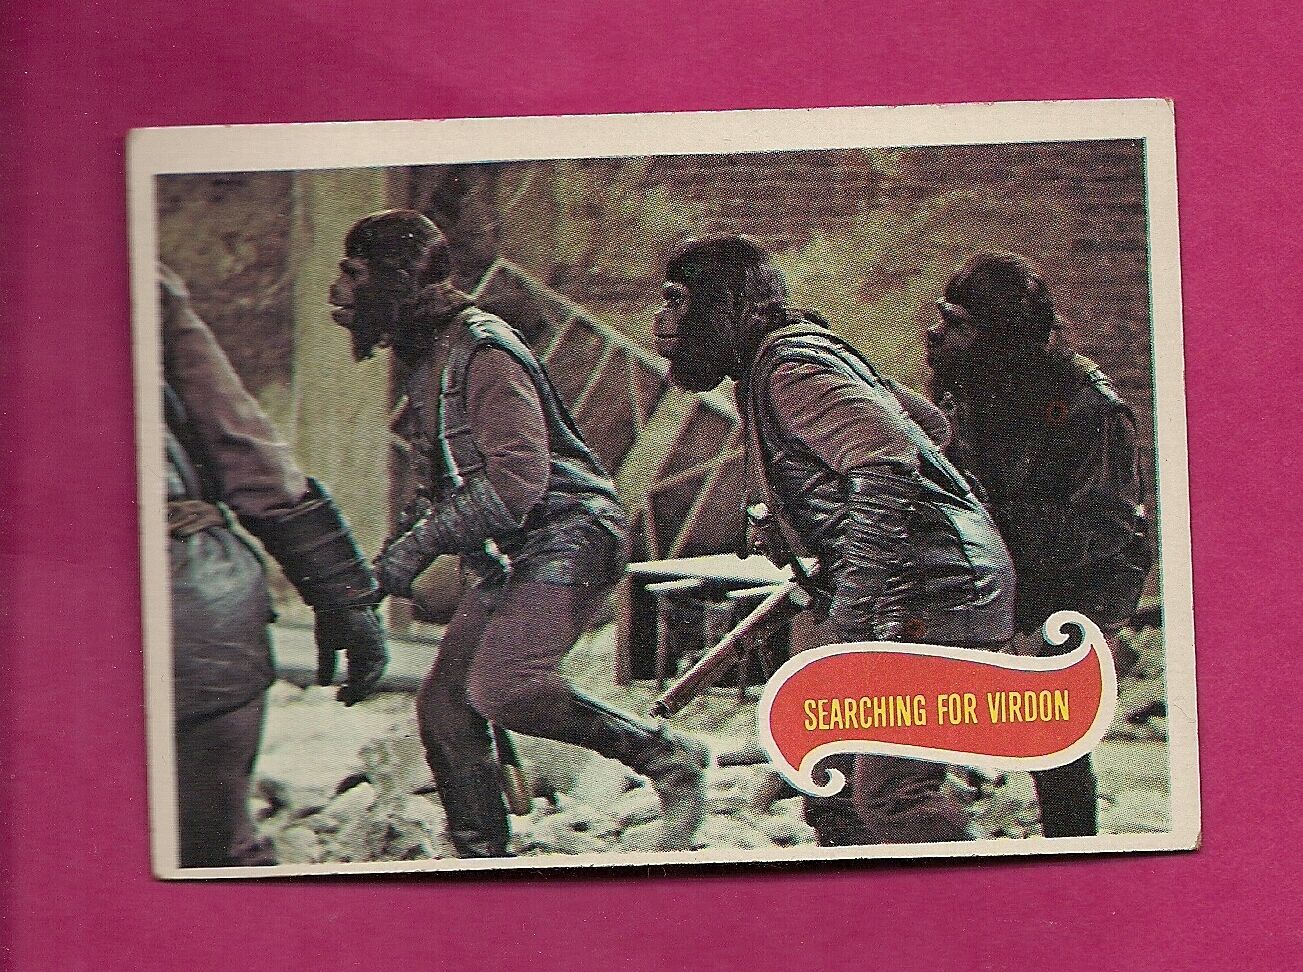 RARE 1975 # 32 PLANET OF THE APES SEARCHING FOR VIRDON EX-MT CARD (INV# A2530)